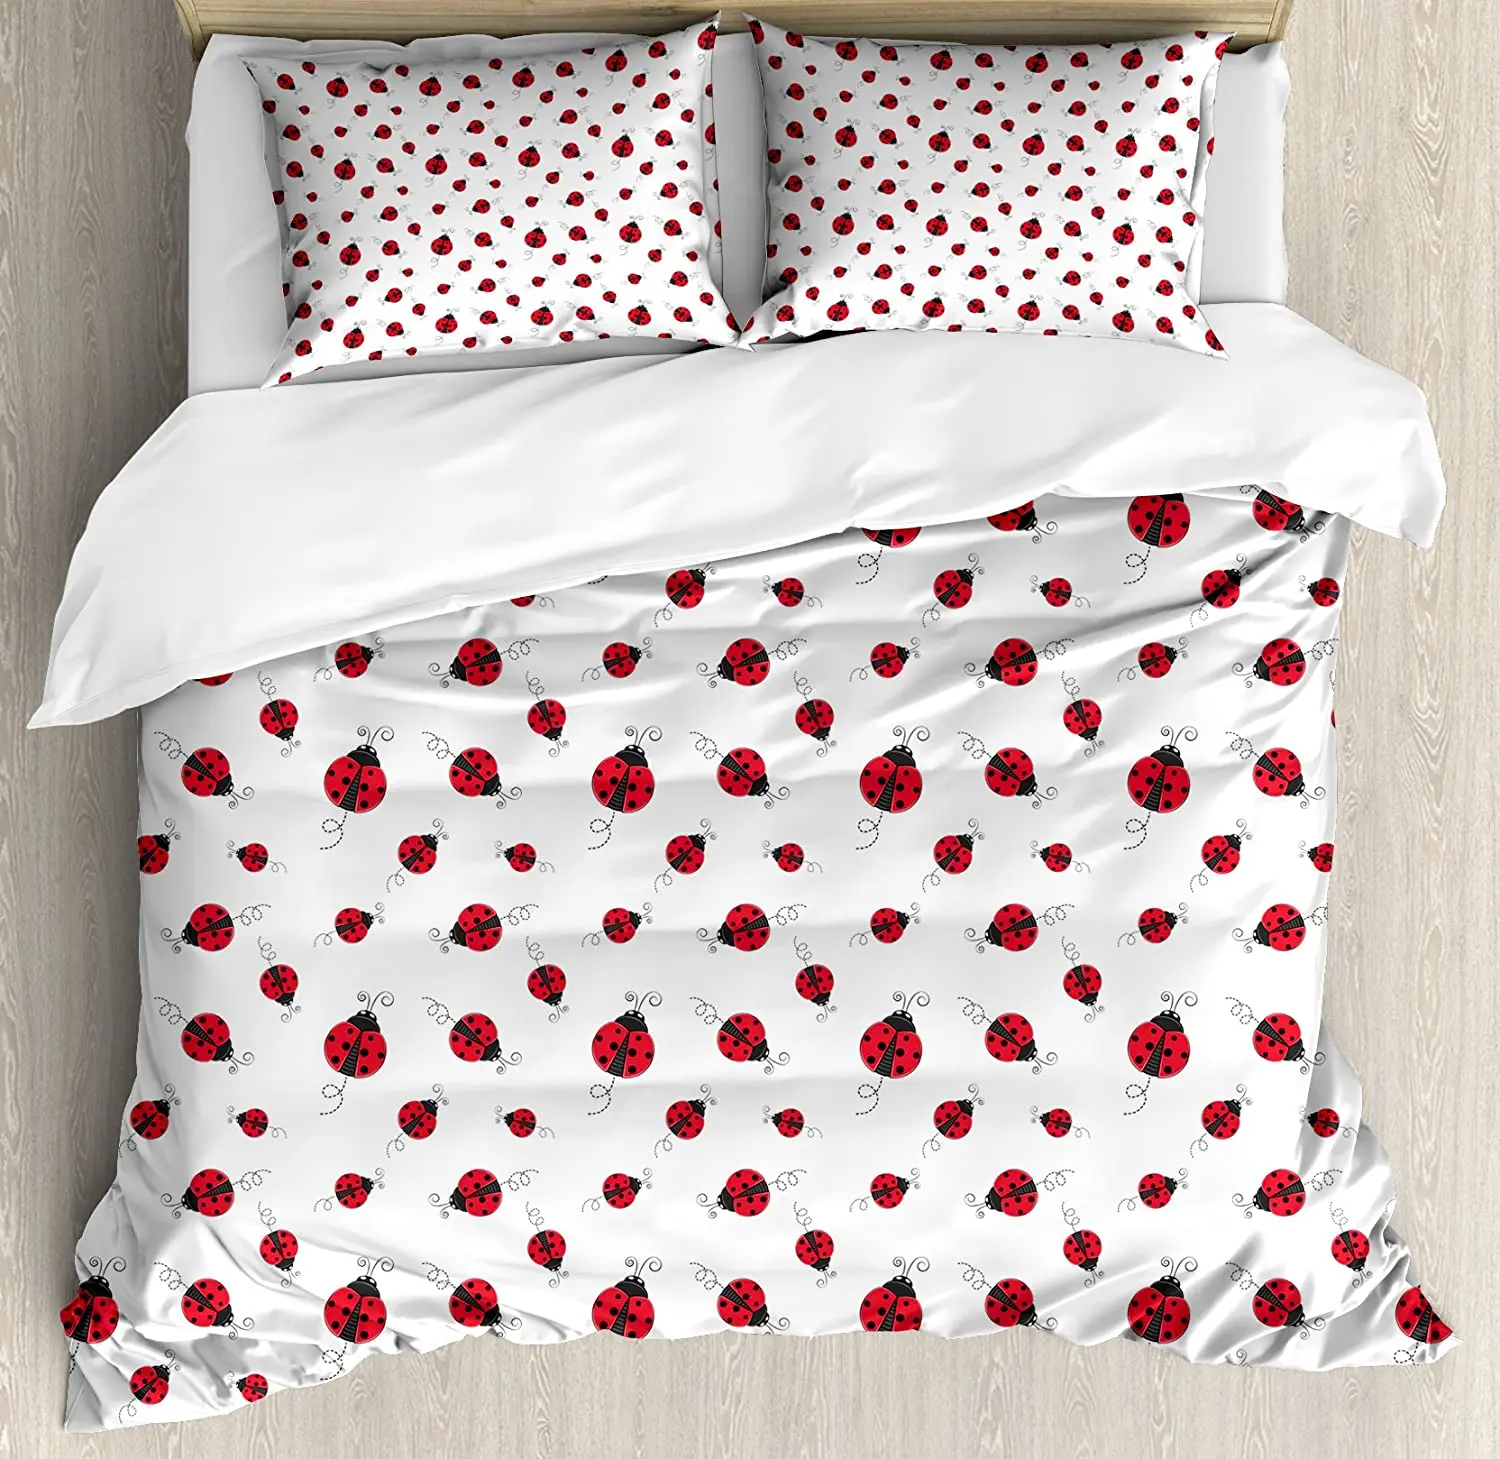 

Ladybugs Bedding Set For Bedroom Bed Home Ladybug with Dotted Wings Swirls and Curves Abs Duvet Cover Quilt Cover And Pillowcase